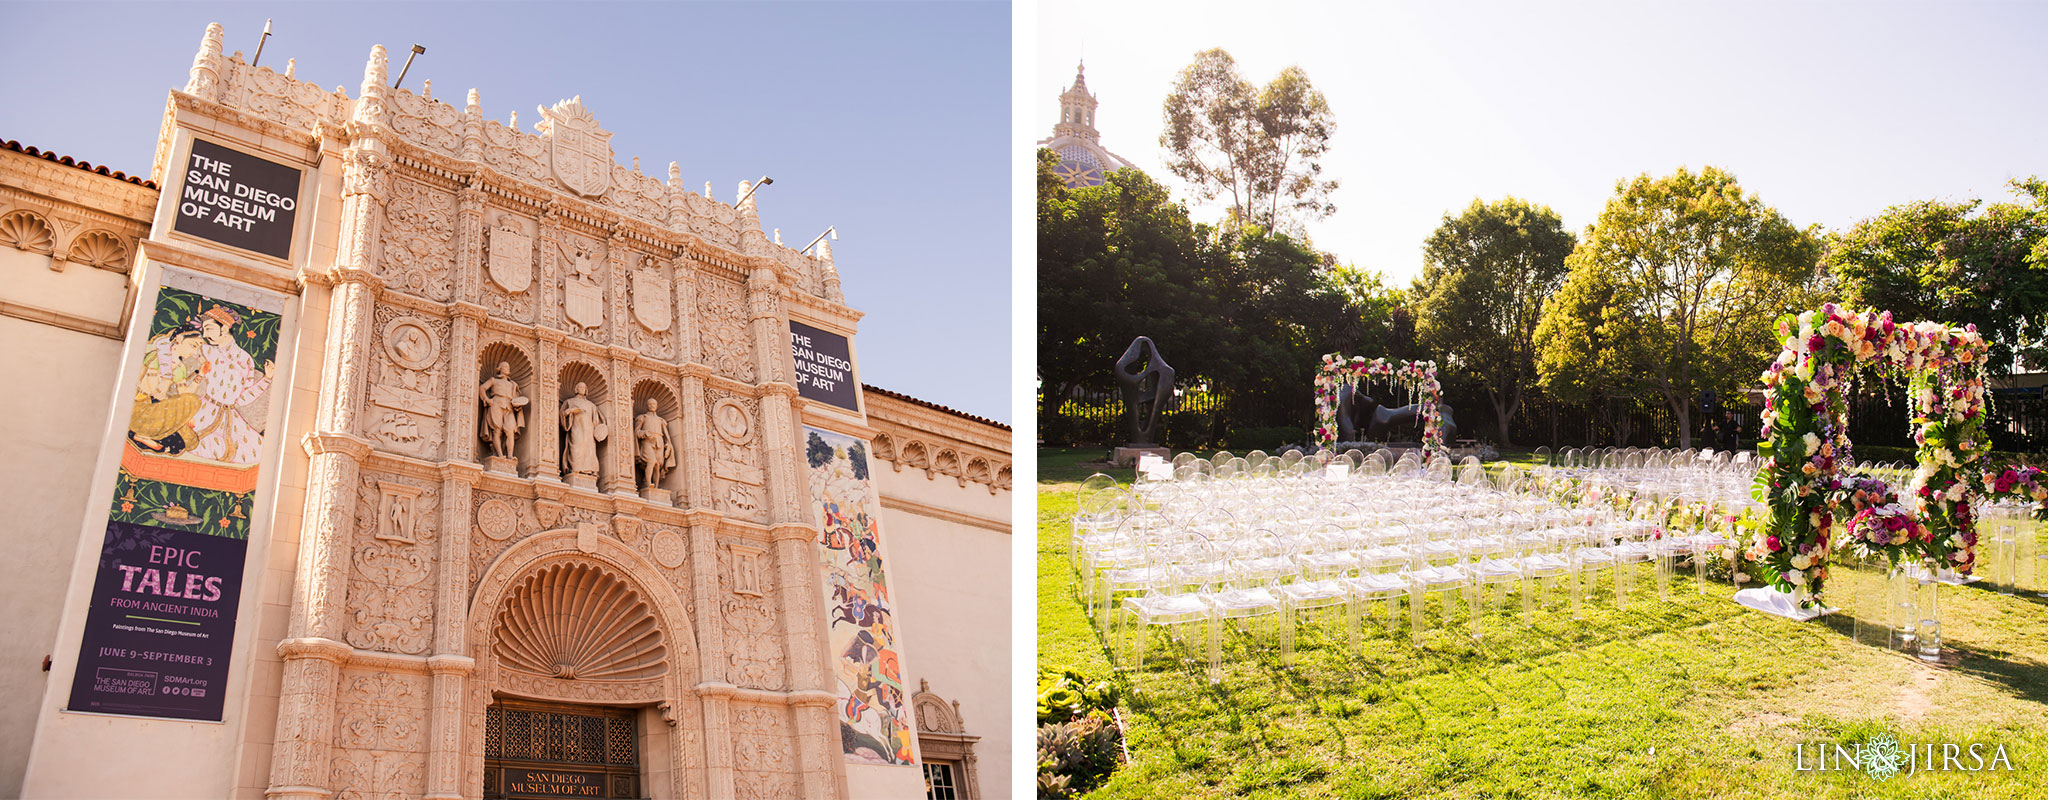 051 san diego museum of art architecture wedding ceremony photography